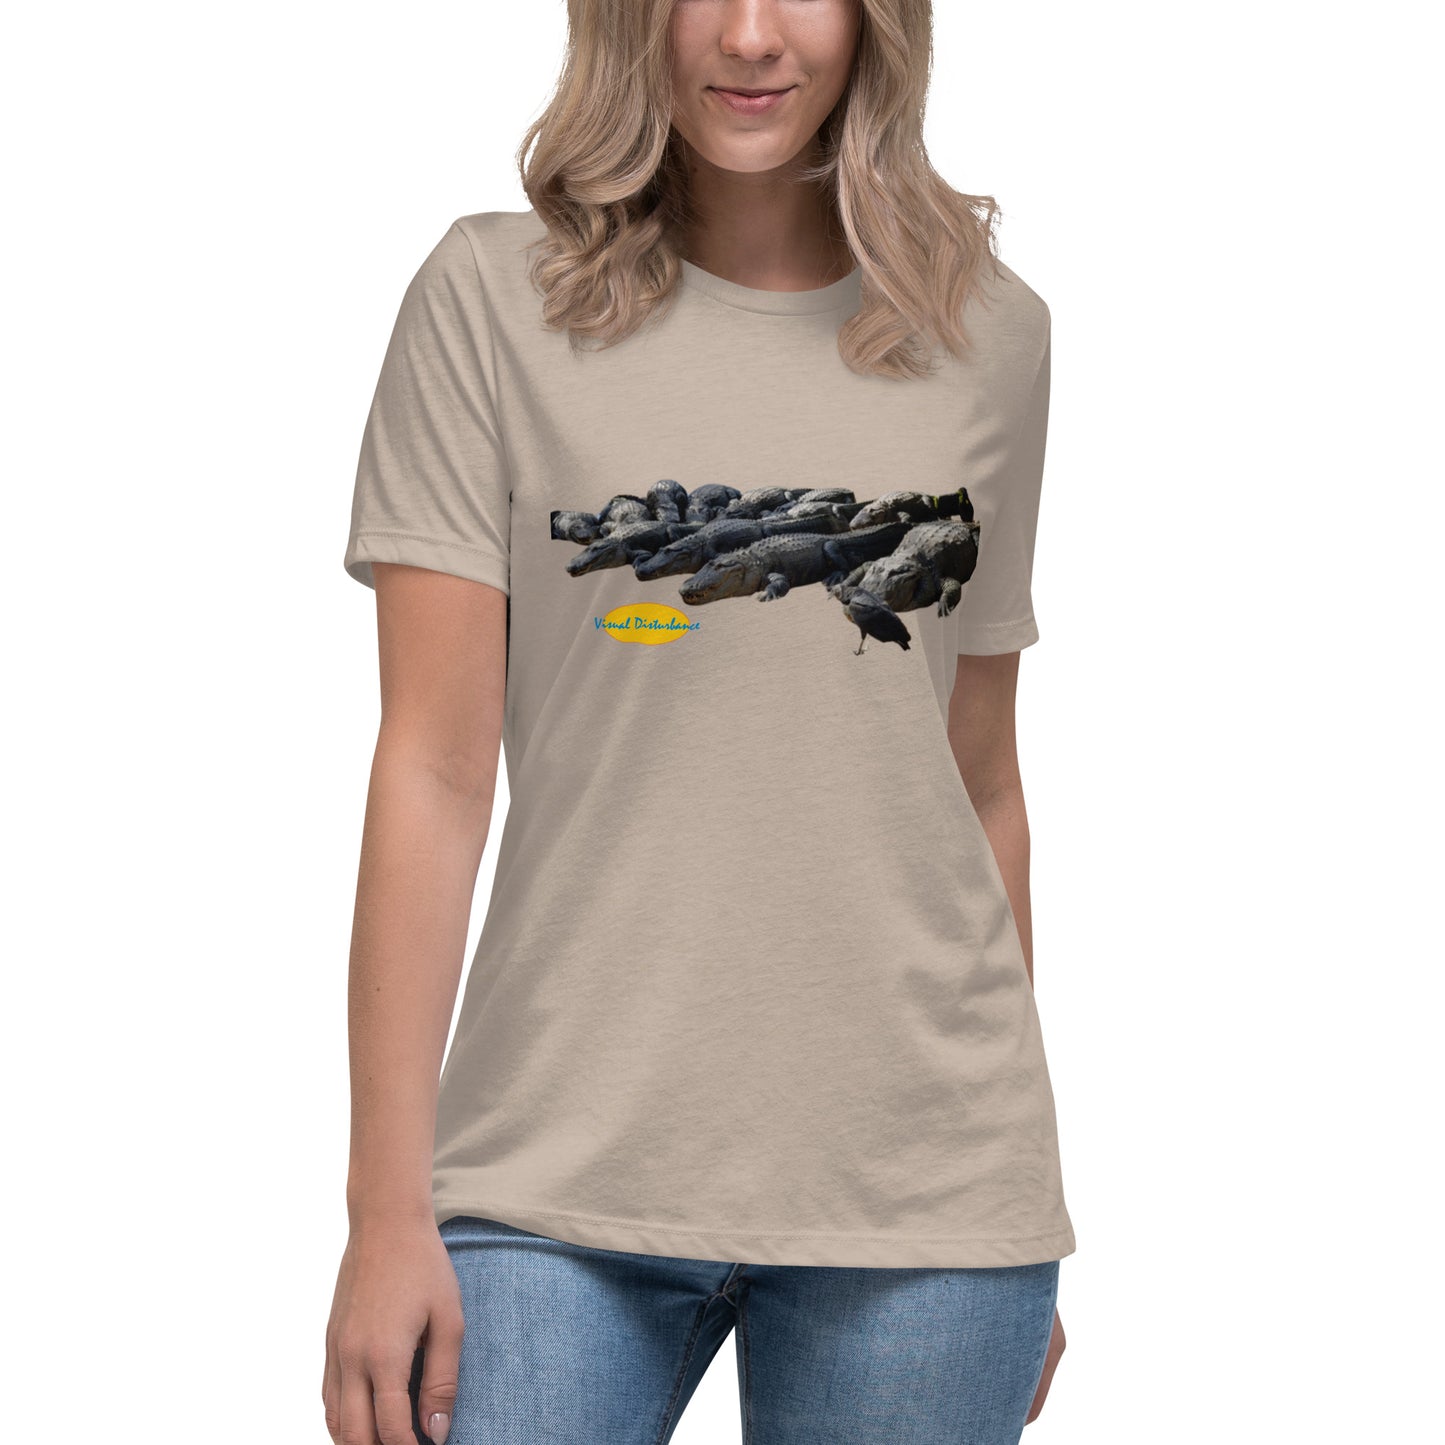 A Vulture and Alligators Women's Relaxed T-Shirt